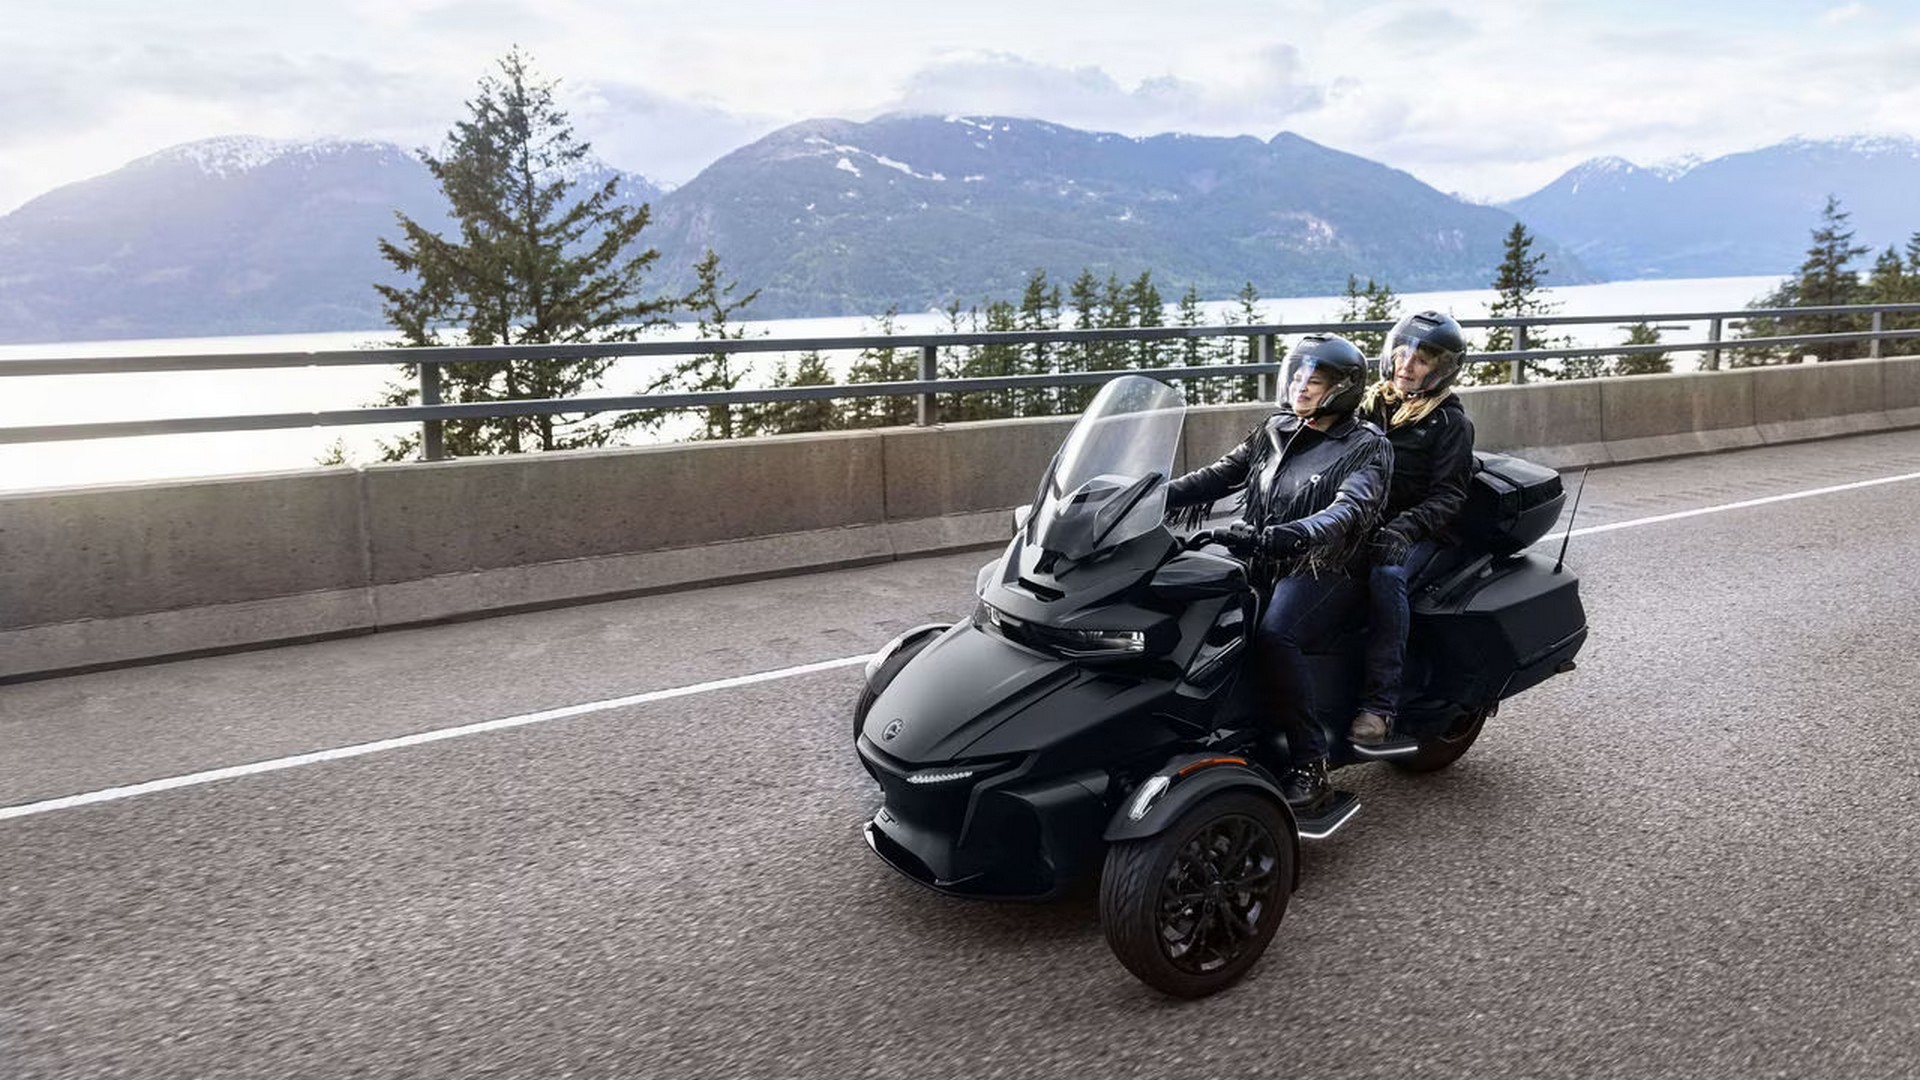 2023 Can-Am Spyder RT - 3-wheel touring motorcycle